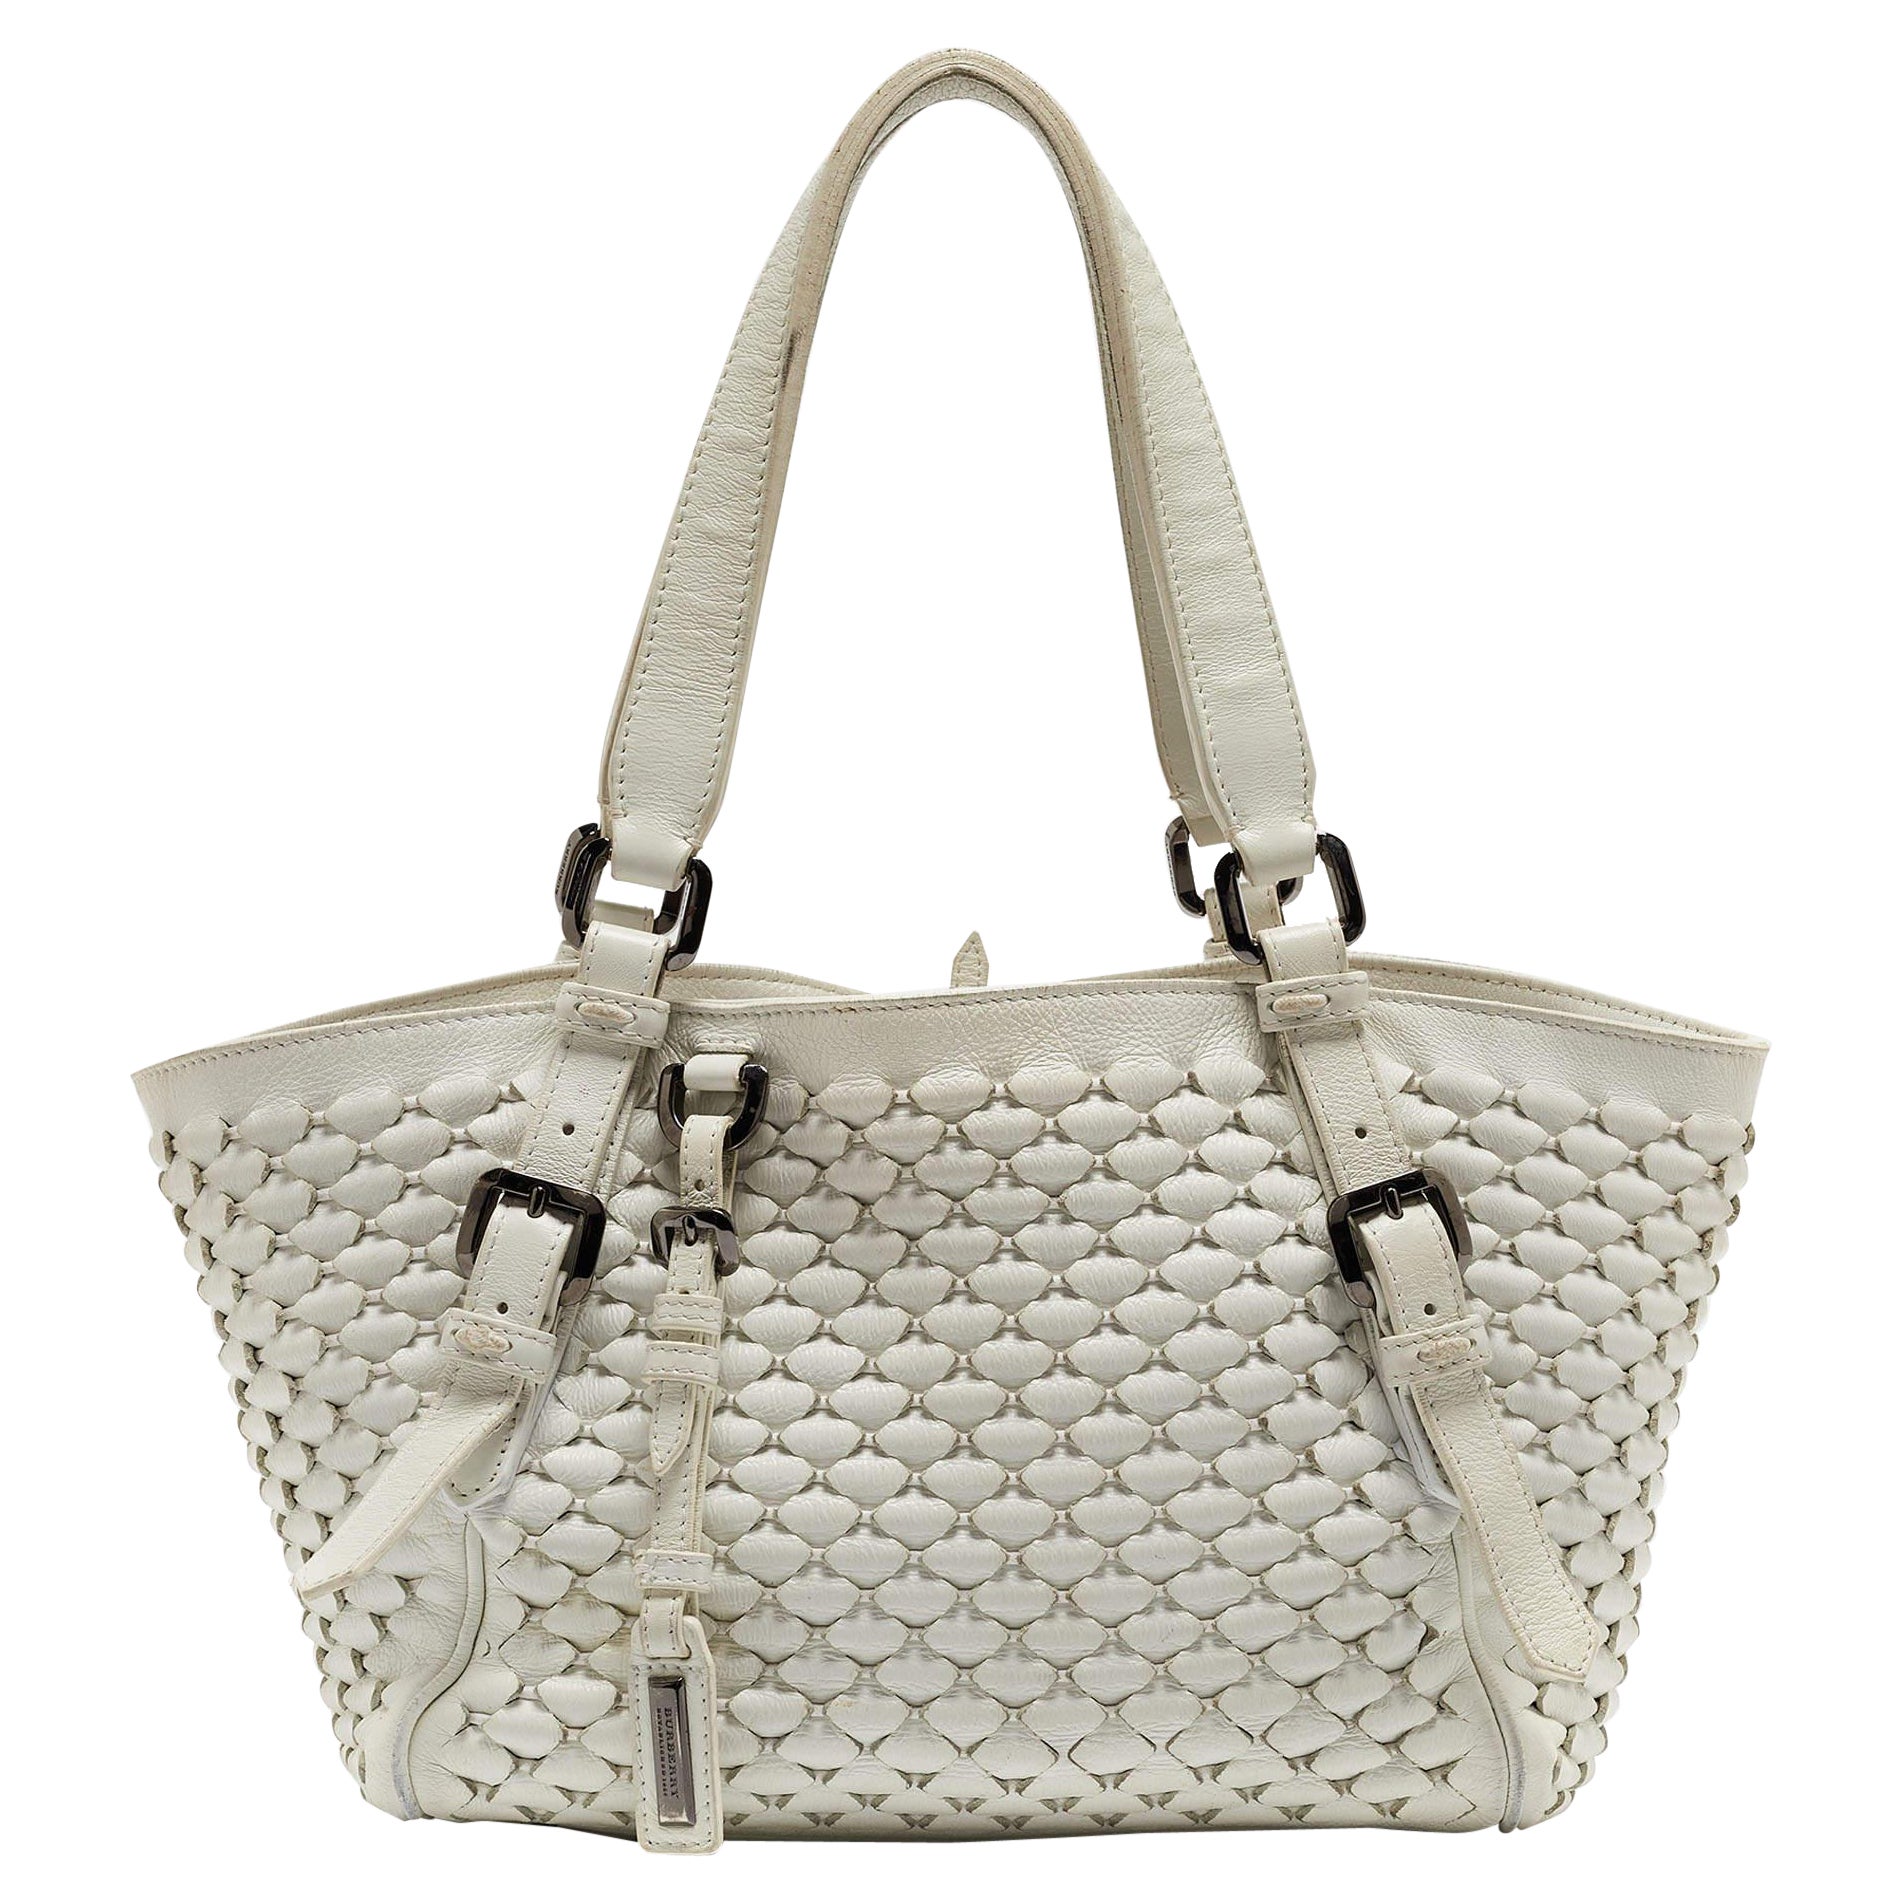 Burberry White Woven Leather Tote For Sale